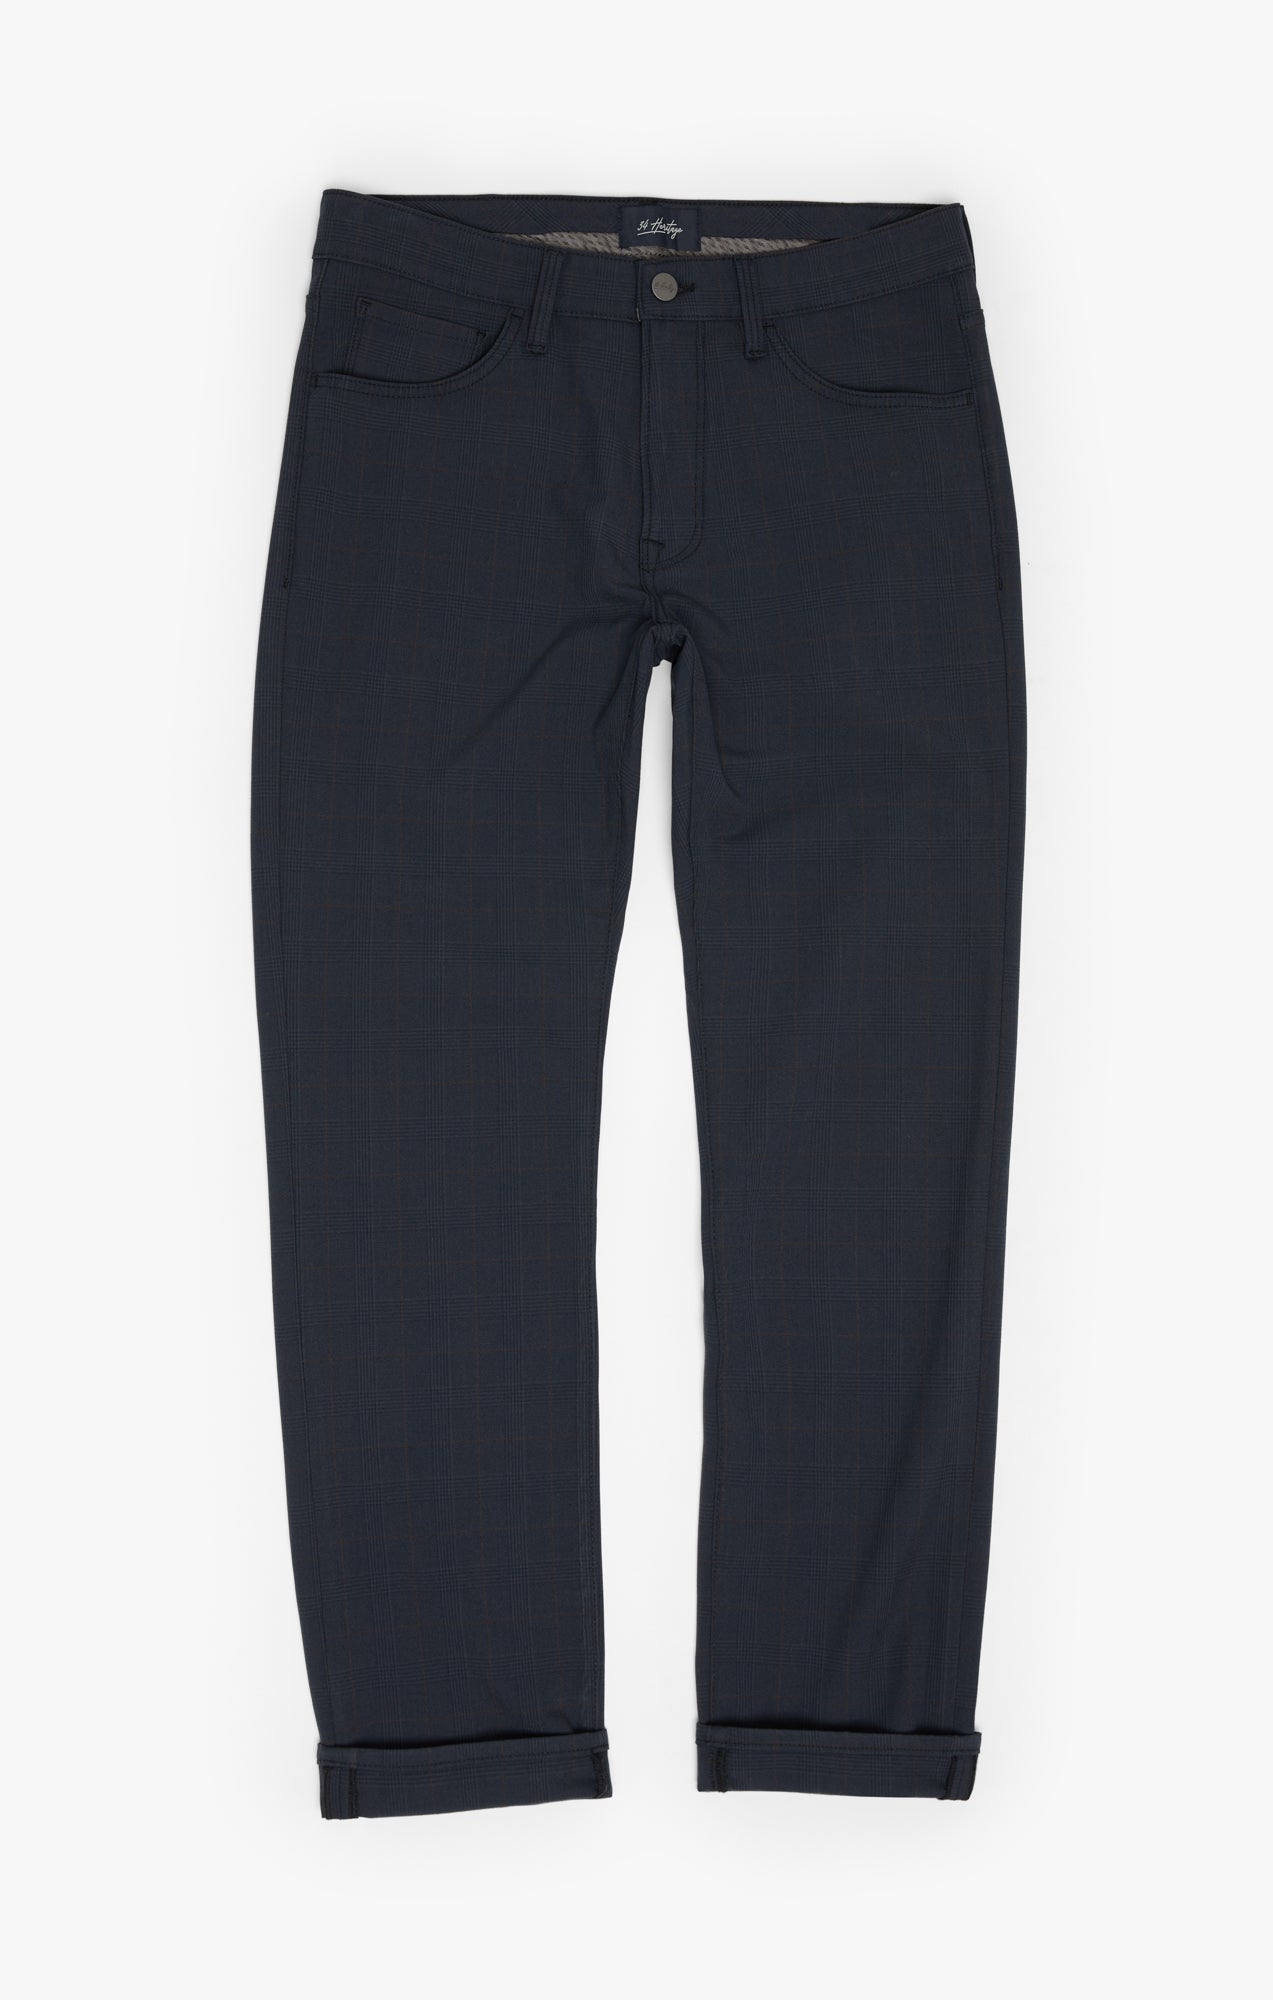 Cool Tapered Leg Pants In Navy Elite Check Image 7